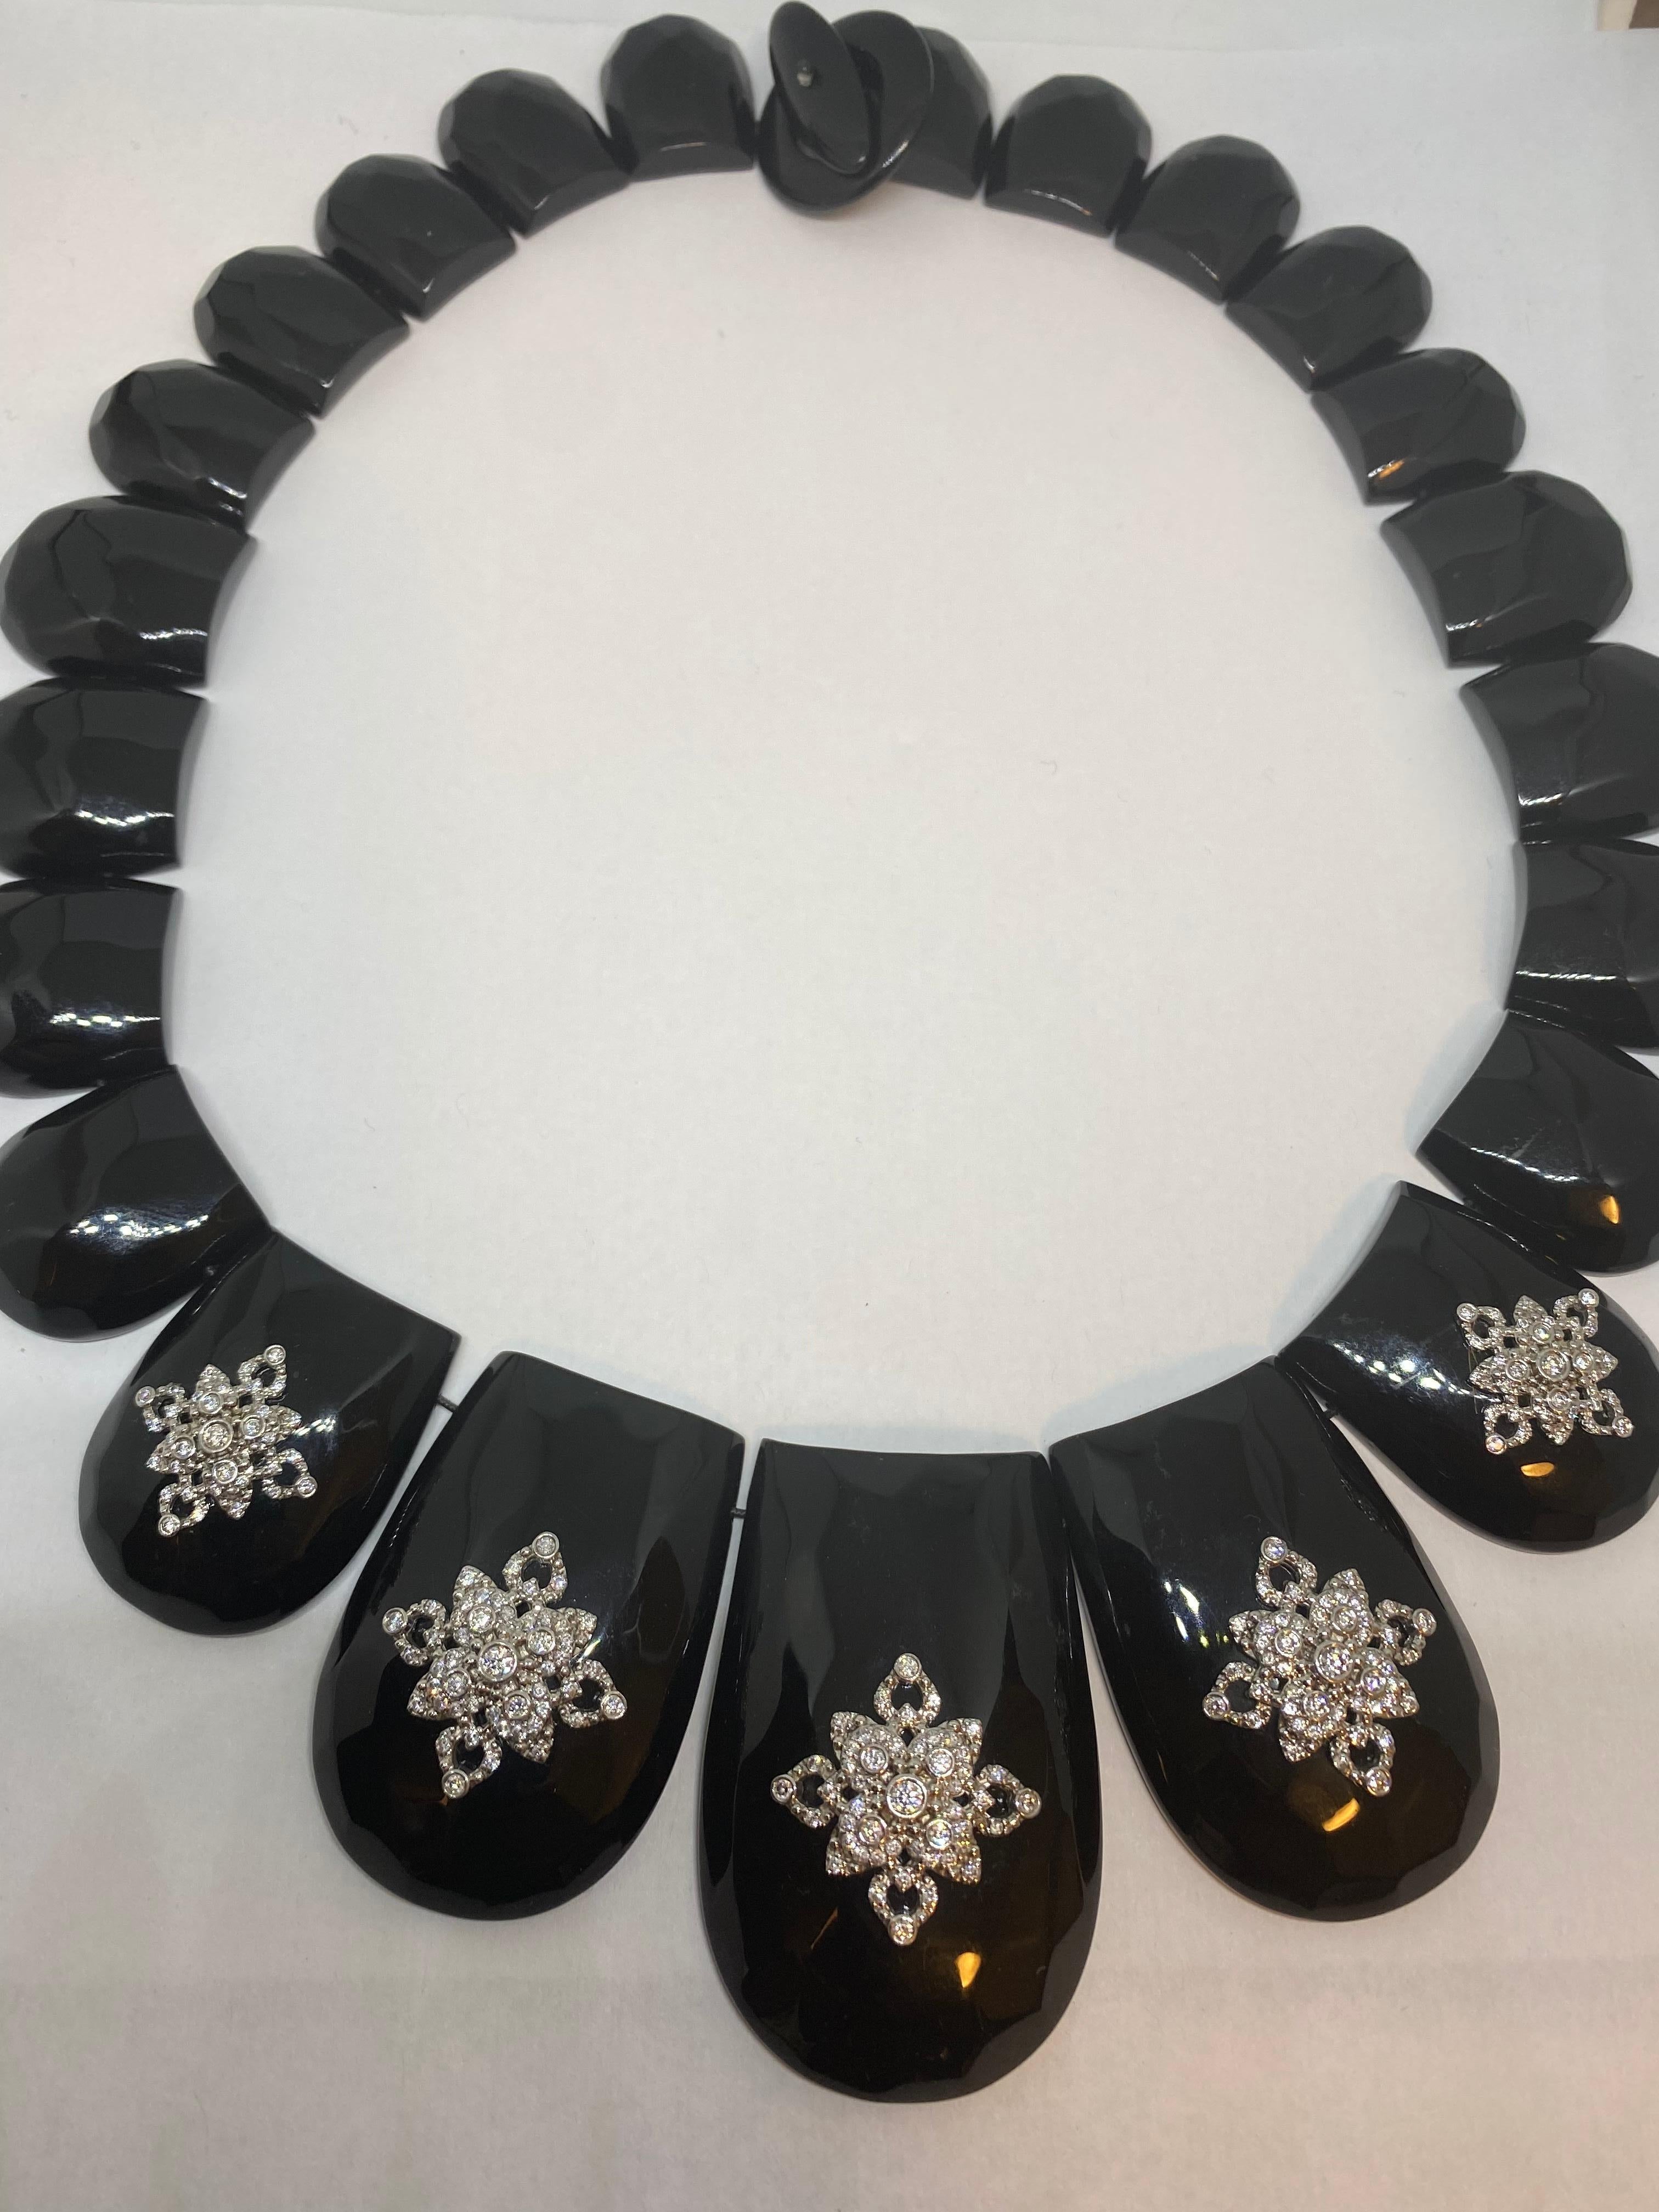 Miriam Salat choker features black resin with vintage sterling silver.
Fantastic option for an evening dinner or even a gala. 
Cubic zircon full diamond facet rounds, prong set.
necklace is chocker length.
Measures apx 16 inches
Total weight is